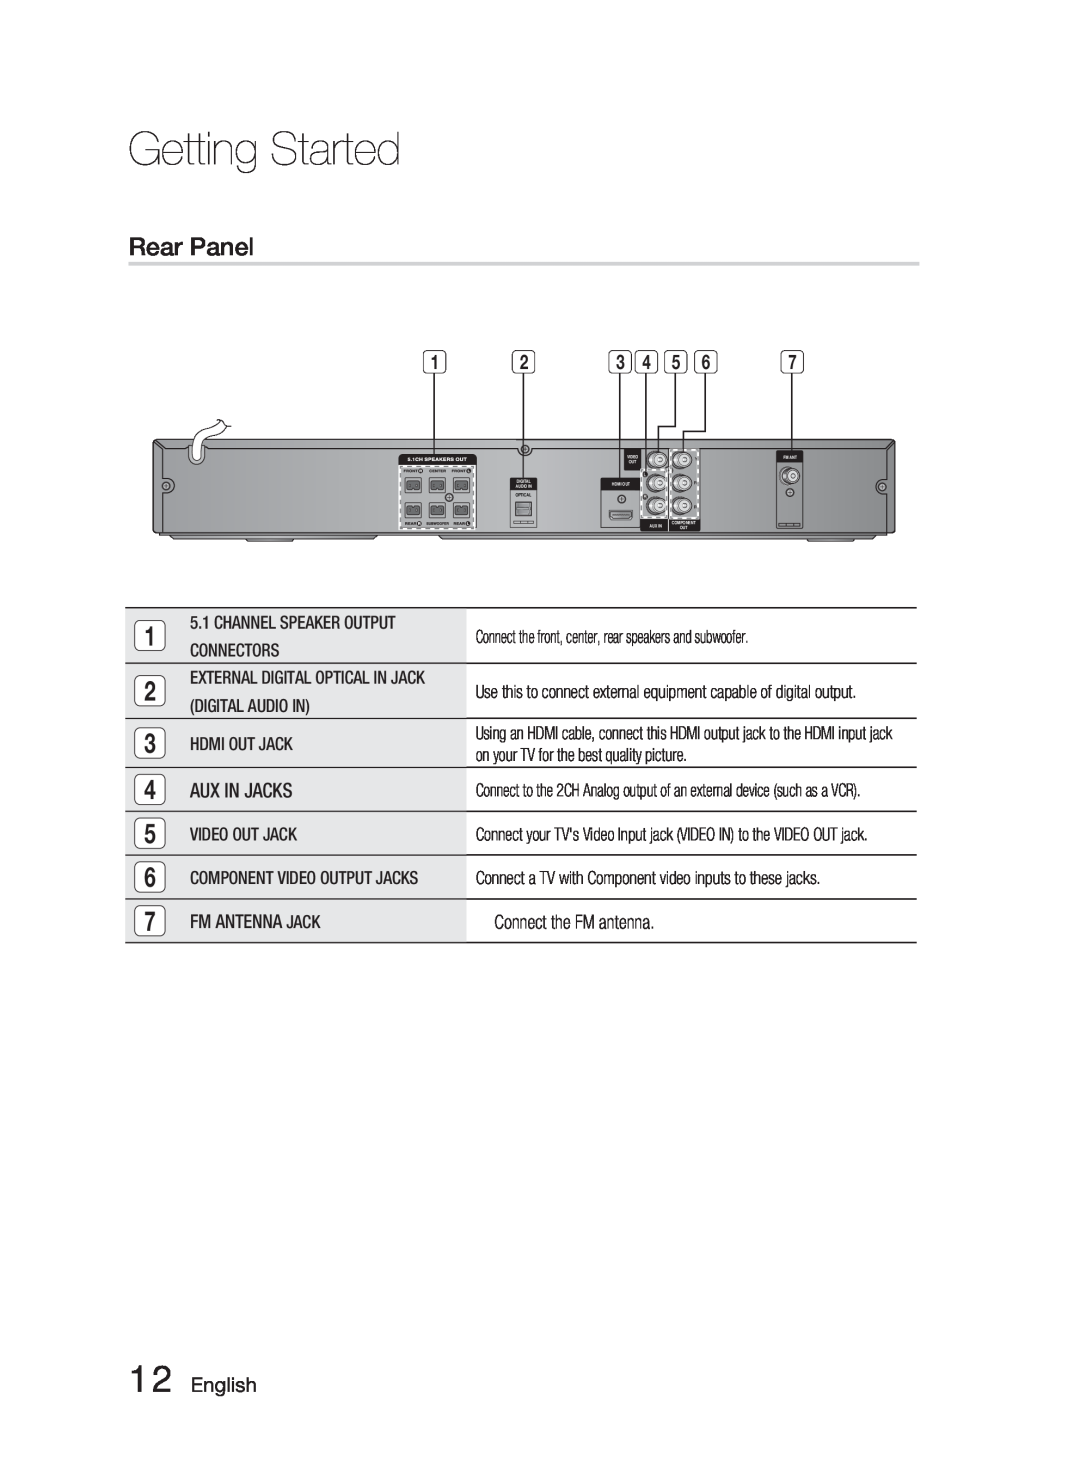 Samsung AH68-02259Q, HT-C463-XAC user manual Rear Panel, Aux In Jacks, English, Getting Started 